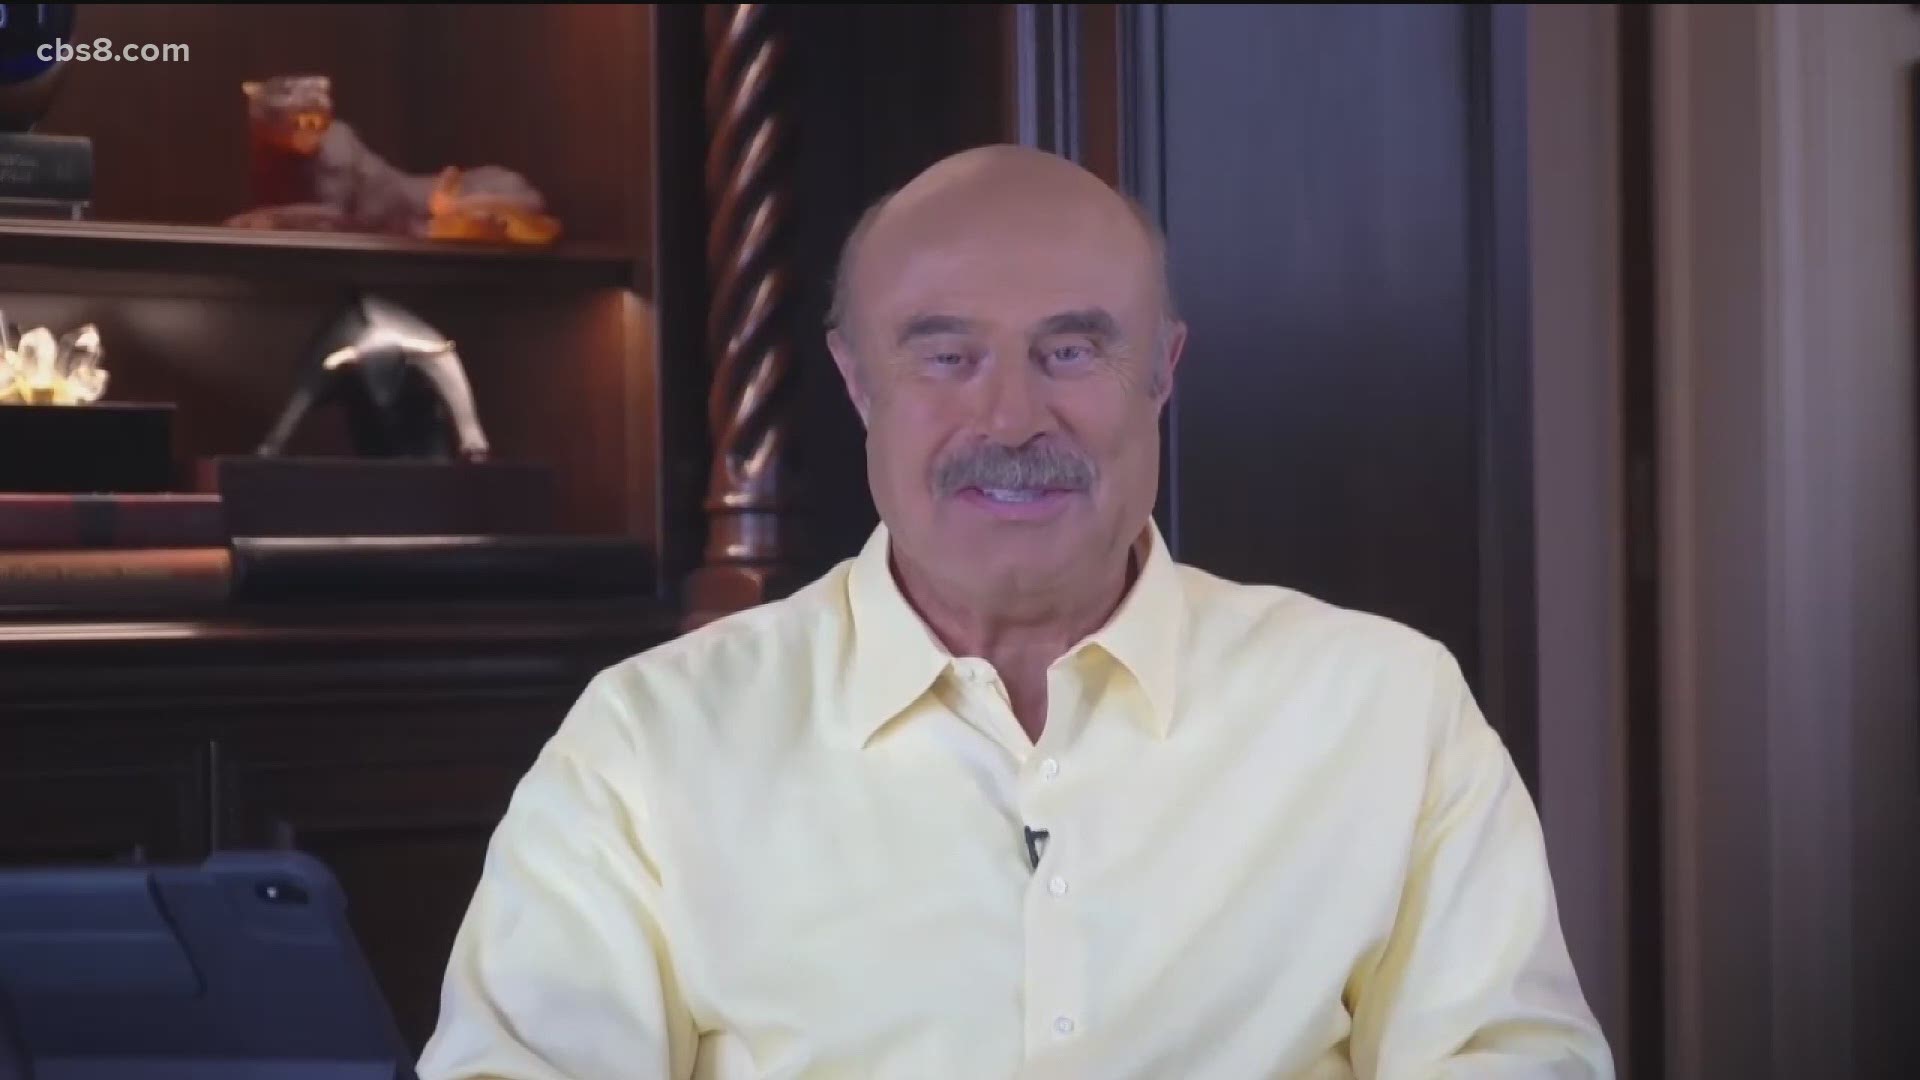 Dr. Phil not only gives mental health advice, but he also gives tips on being with your spouse 24/7!